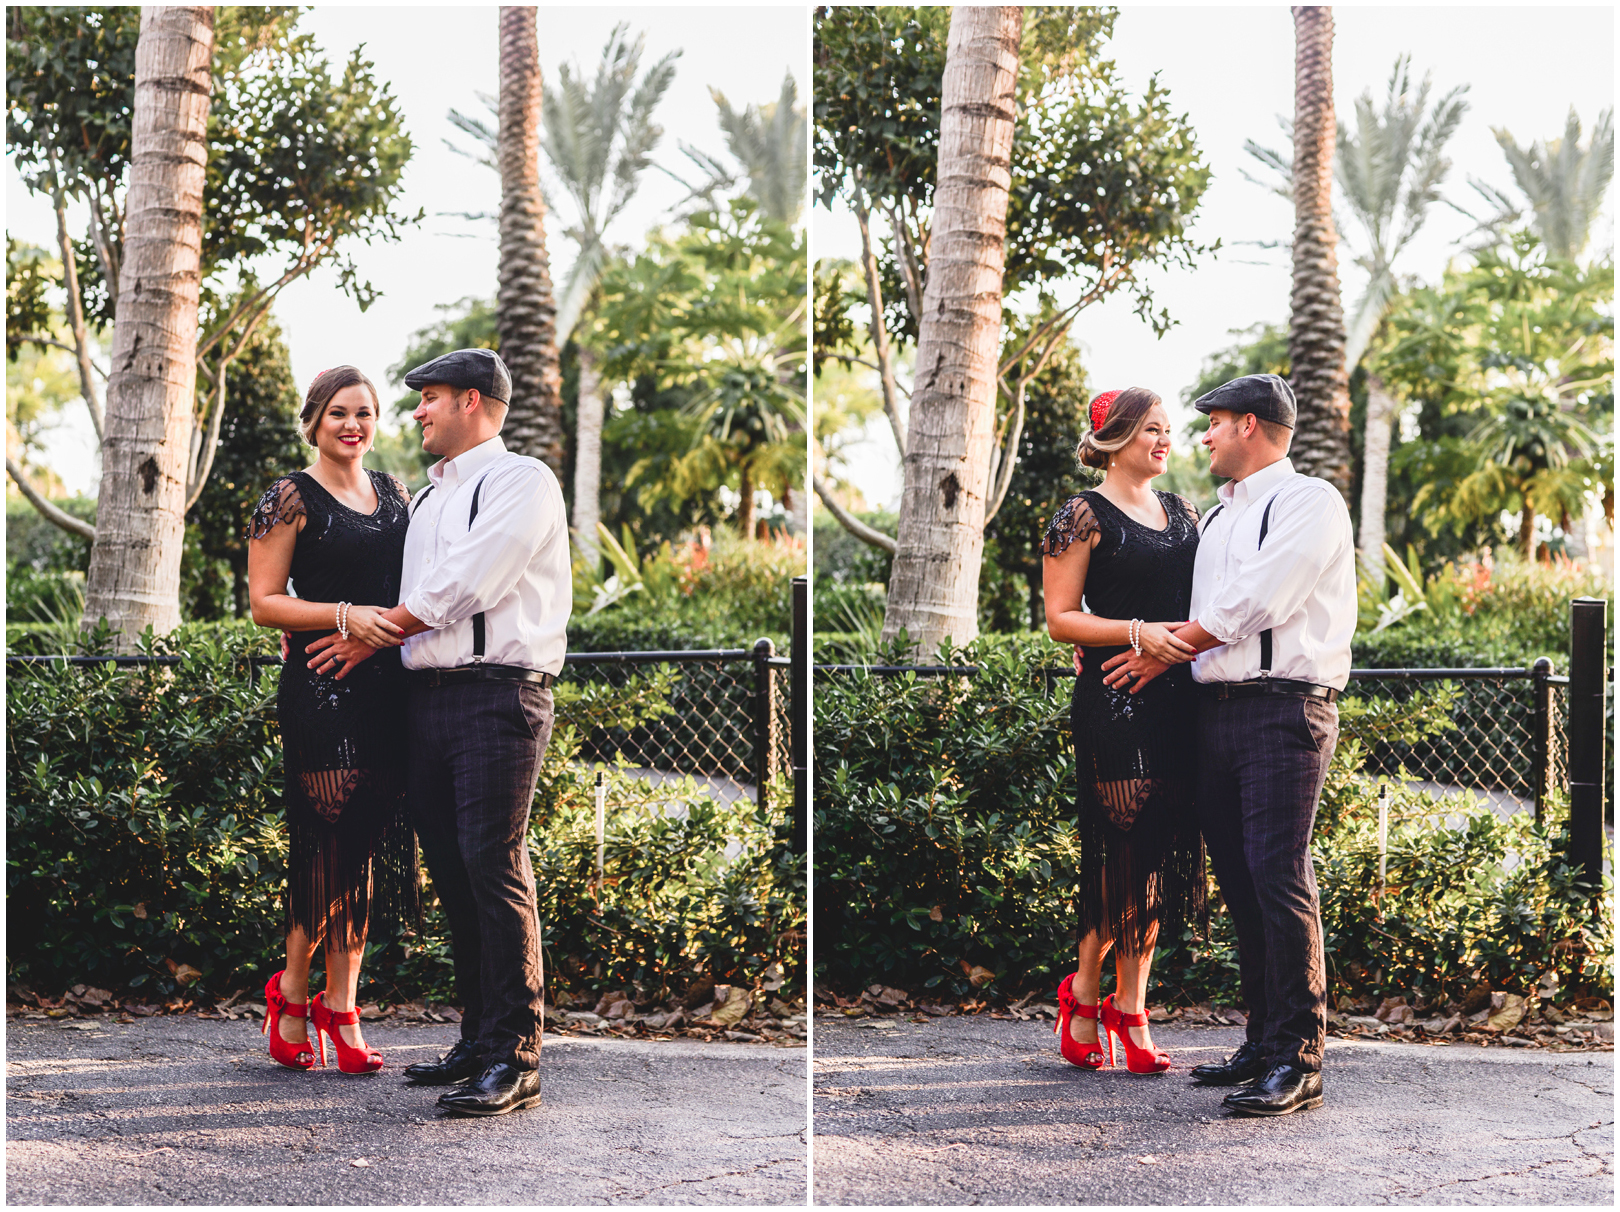 couple, prohibition, red shoes, fence, palm trees